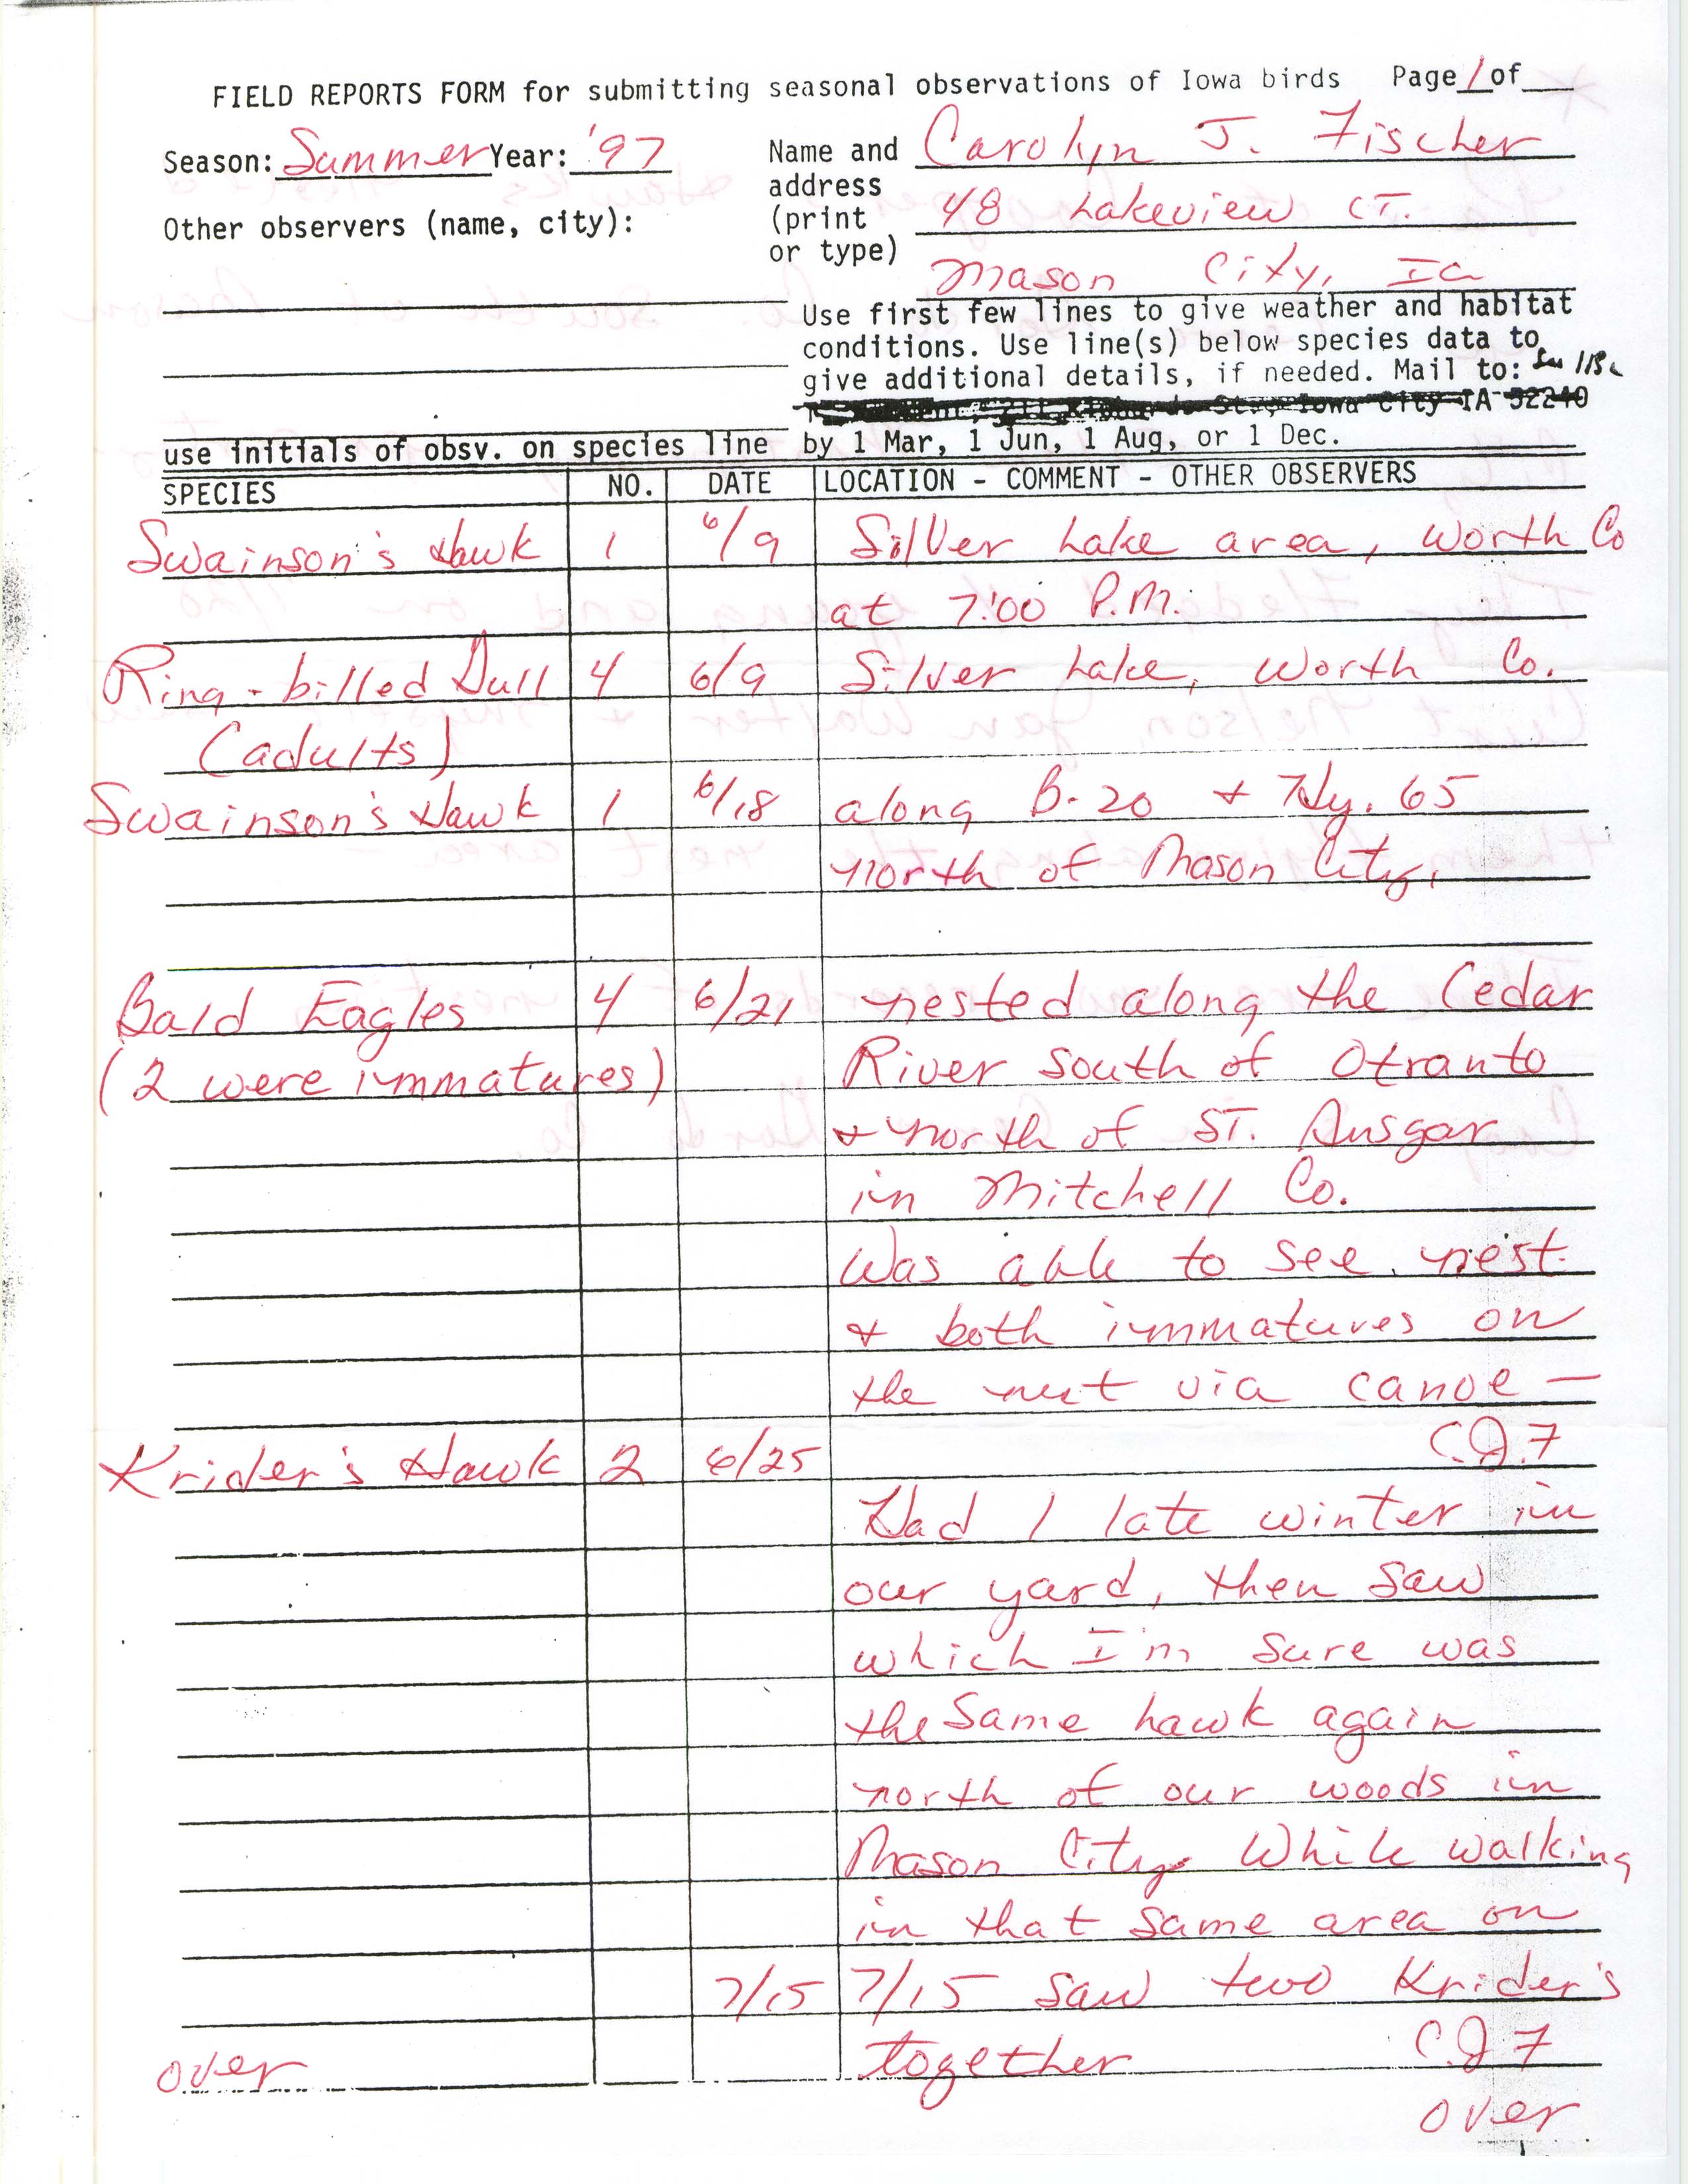 Field reports form for submitting seasonal observations of Iowa birds, Carolyn J. Fischer, summer 1997